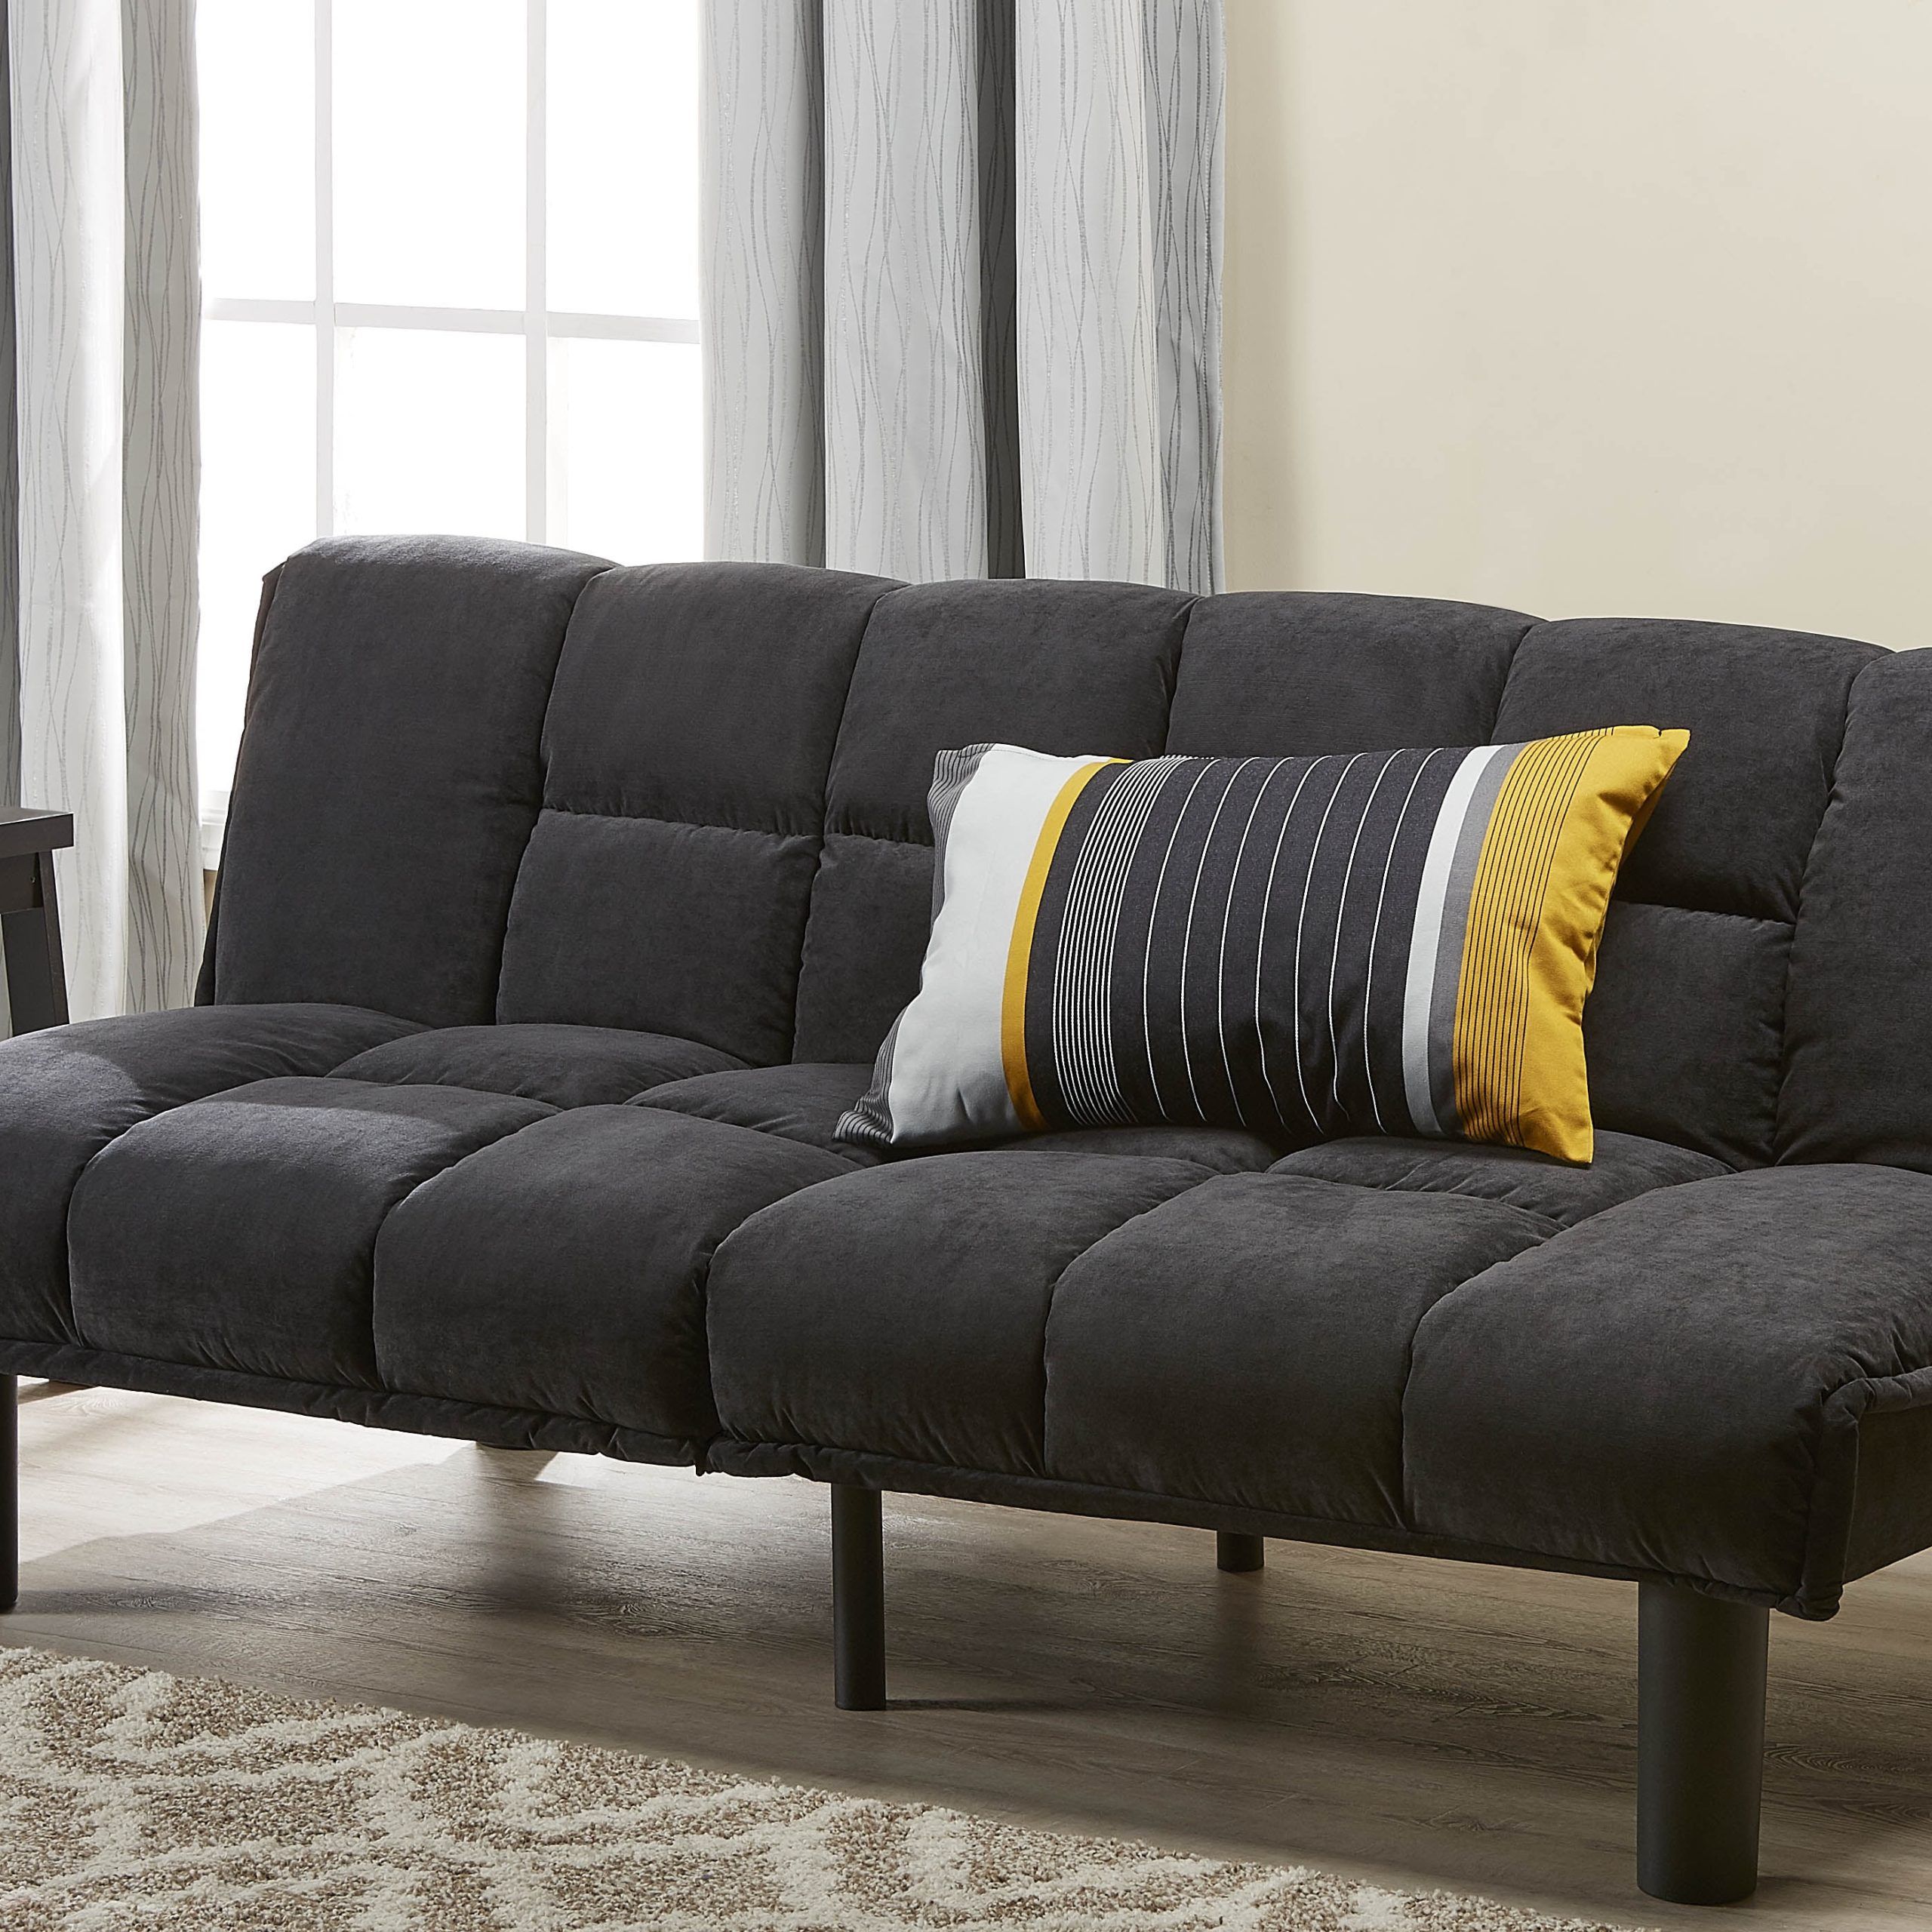 Mainstays Tufted Microfiber Futon, Black Faux Suede – Walmart Within Black Faux Suede Memory Foam Sofas (View 8 of 15)